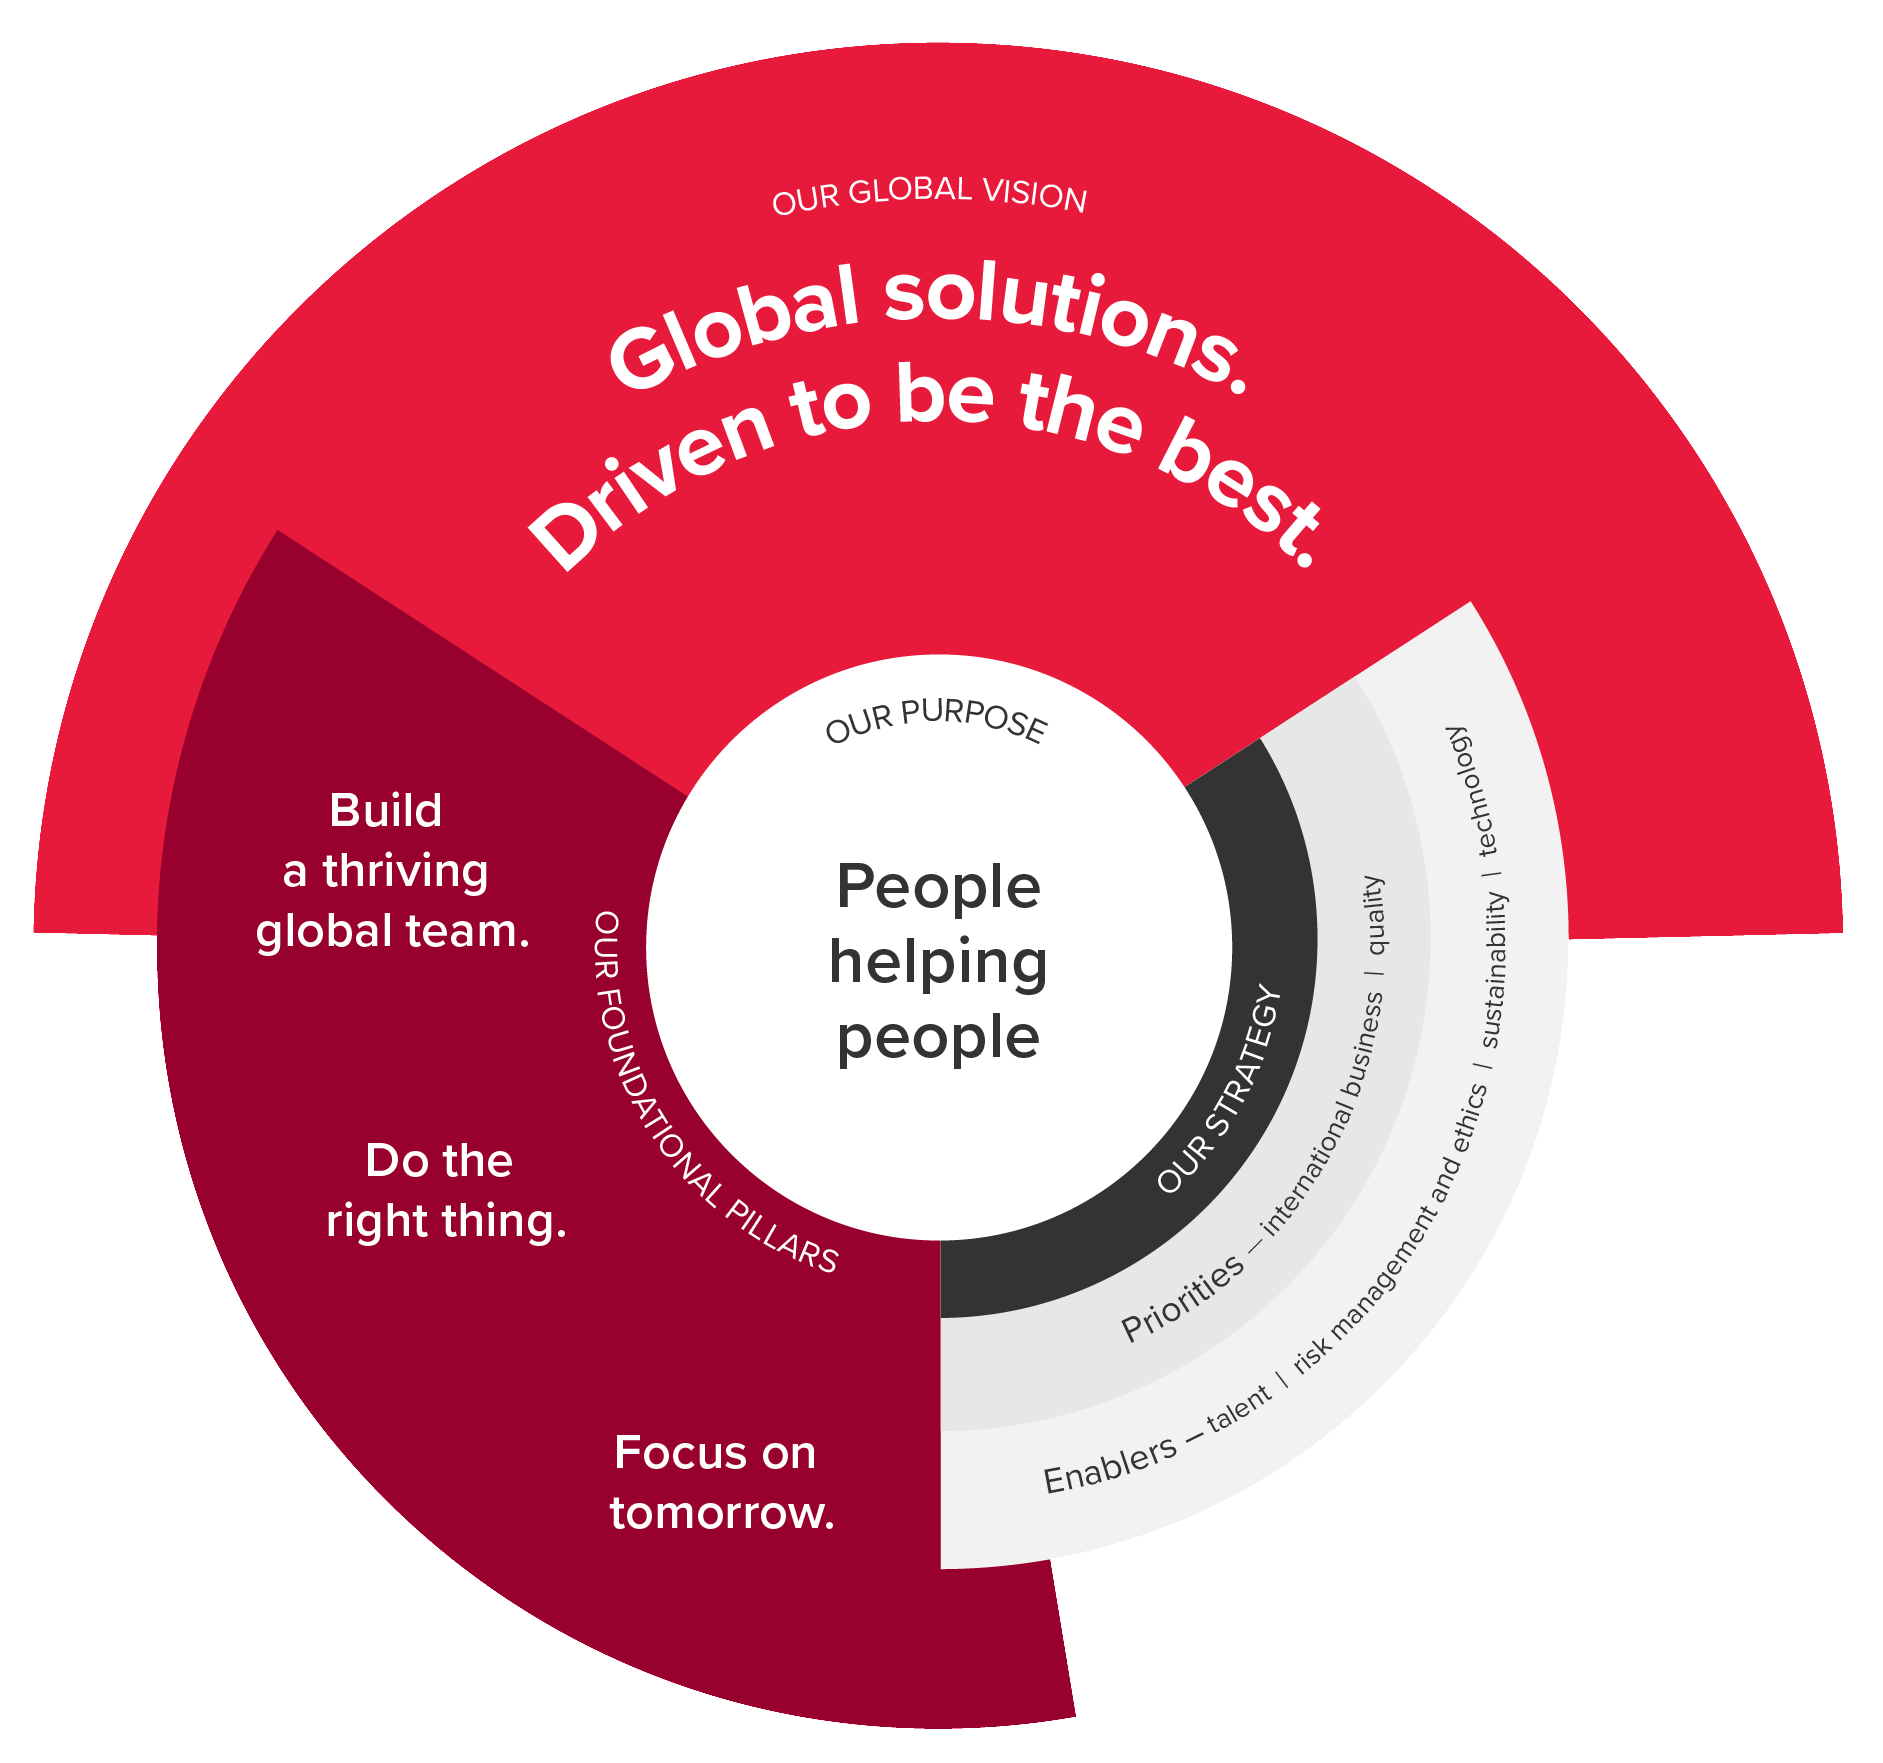 our global vision, our purpose, and our strategy